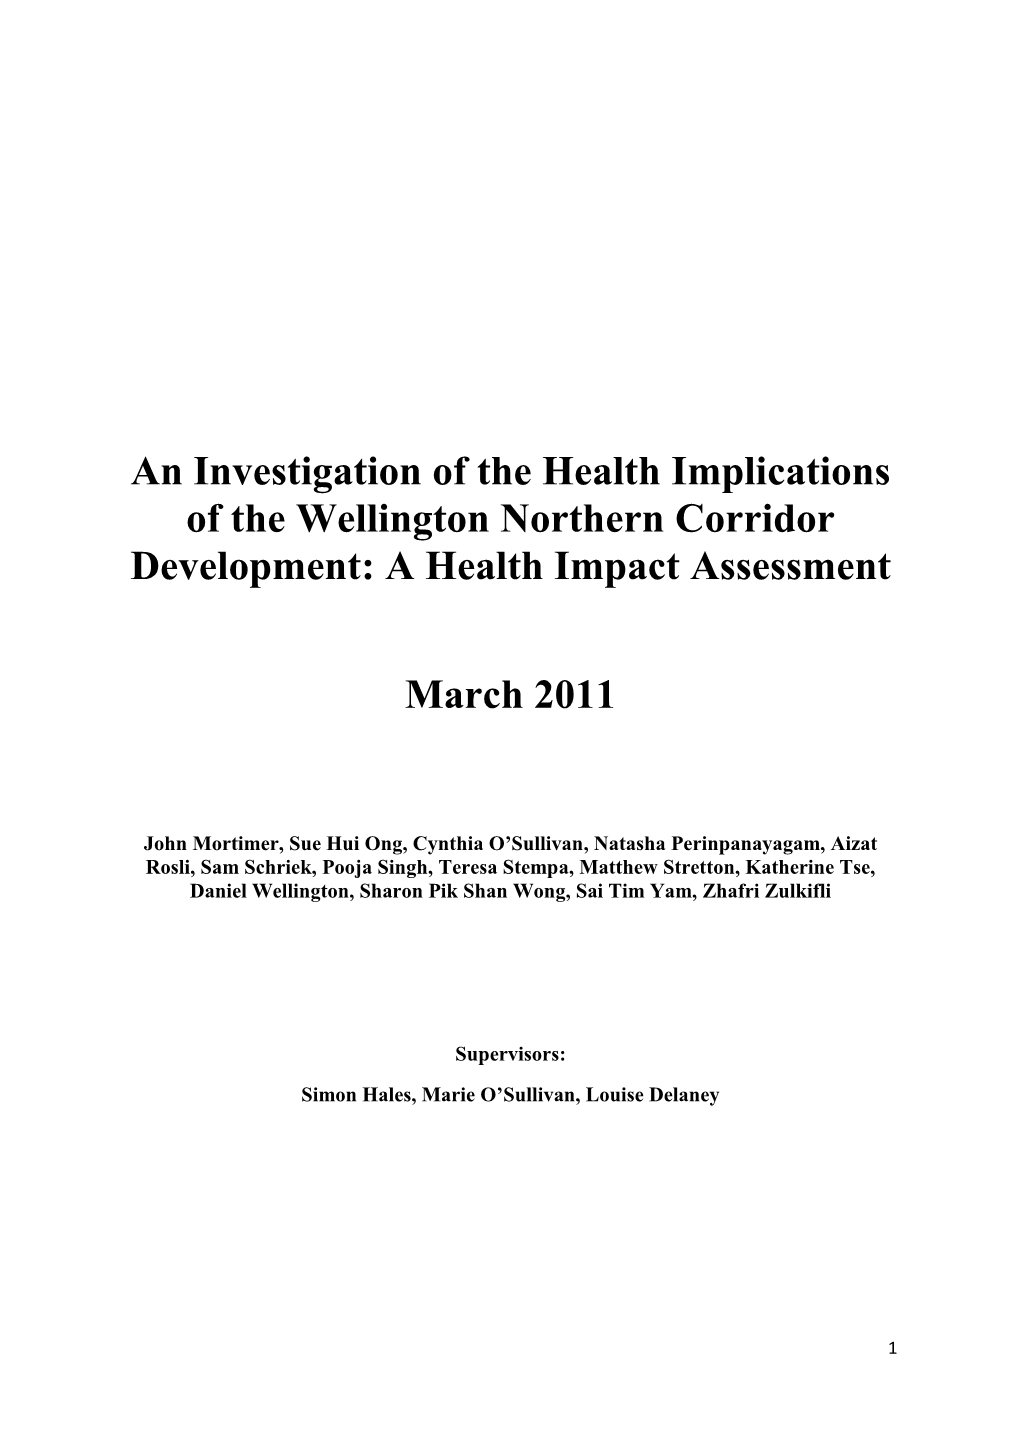 An Investigation of the Health Implications of the Wellington Northern Corridor Development: a Health Impact Assessment